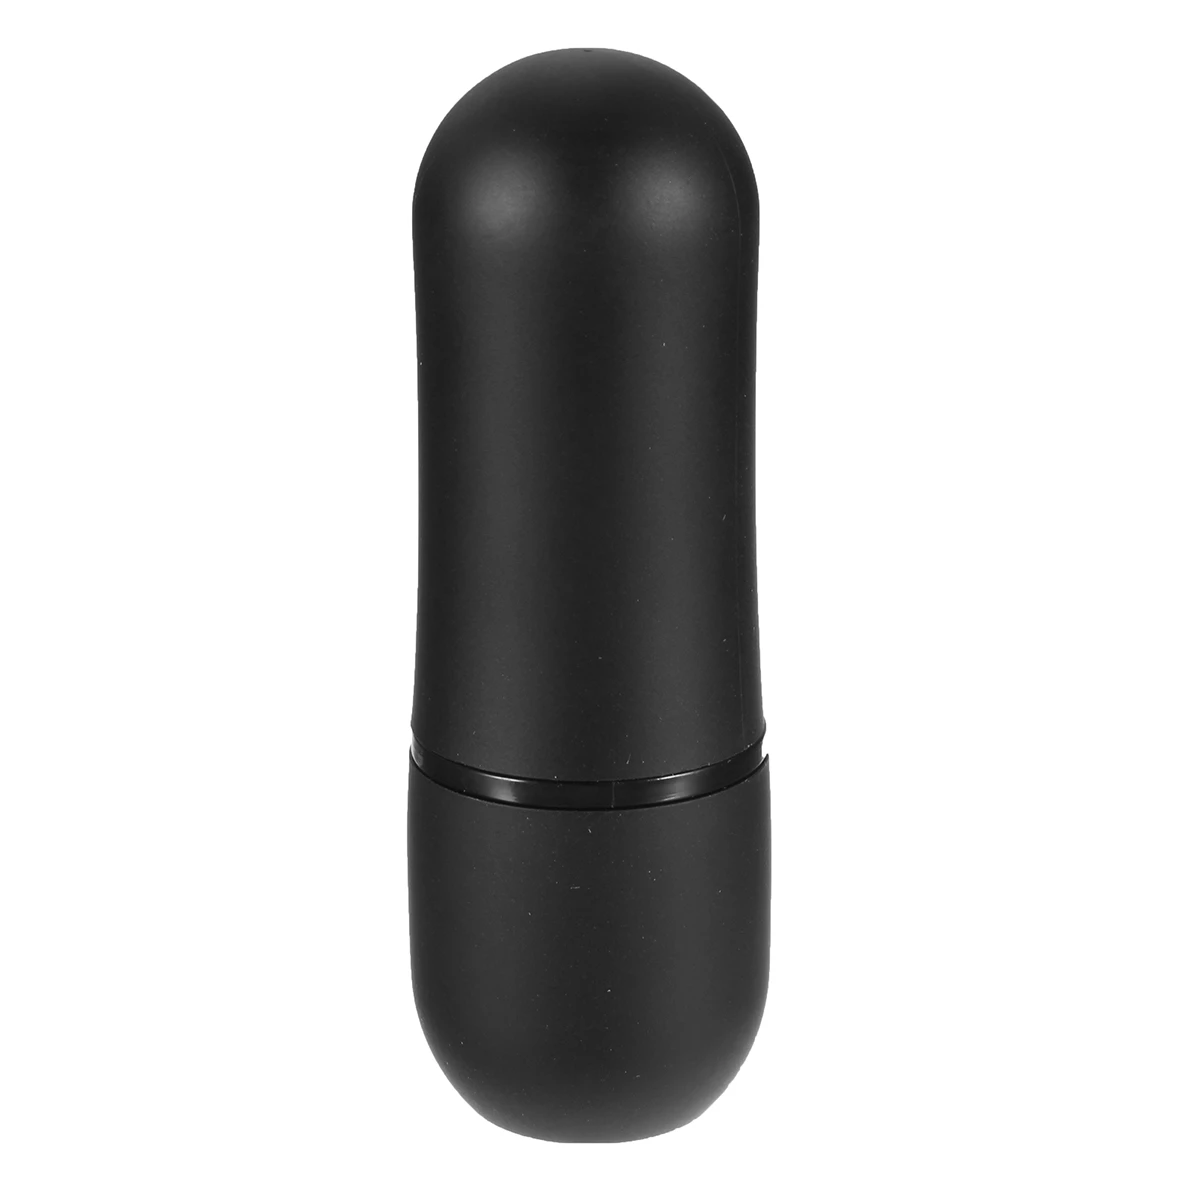 Matte Black Round Empty Lipstick Tube Lip Balm Refillable Container DIY Makeup Cosmetic Tool